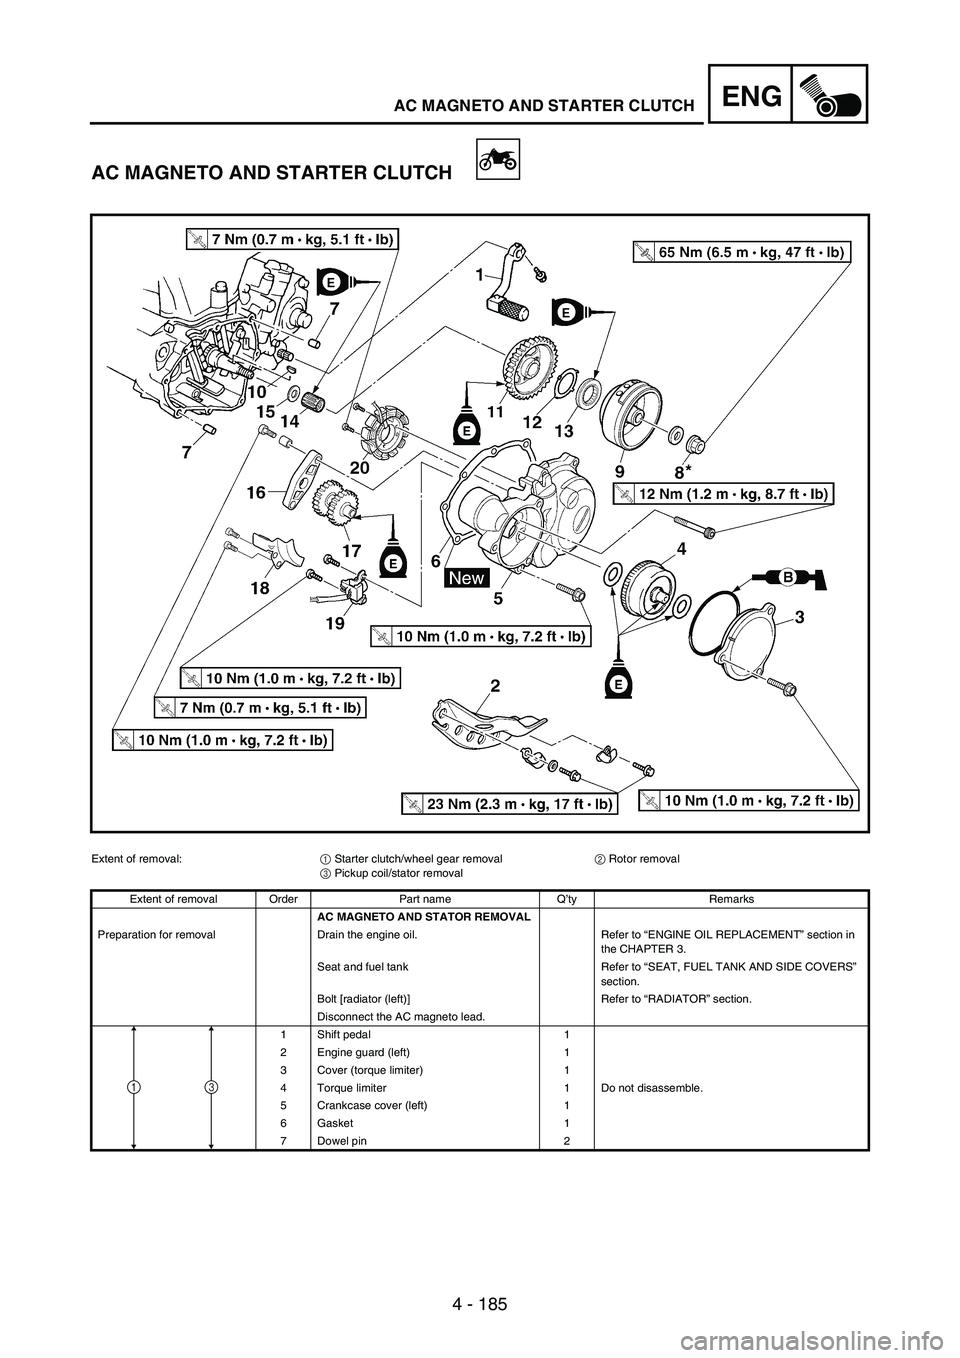 YAMAHA WR 250F 2004  Manuale de Empleo (in Spanish) 4 - 185
ENGAC MAGNETO AND STARTER CLUTCH
AC MAGNETO AND STARTER CLUTCH
Extent of removal:
1 Starter clutch/wheel gear removal
2 Rotor removal
3 Pickup coil/stator removal
Extent of removal Order Part 